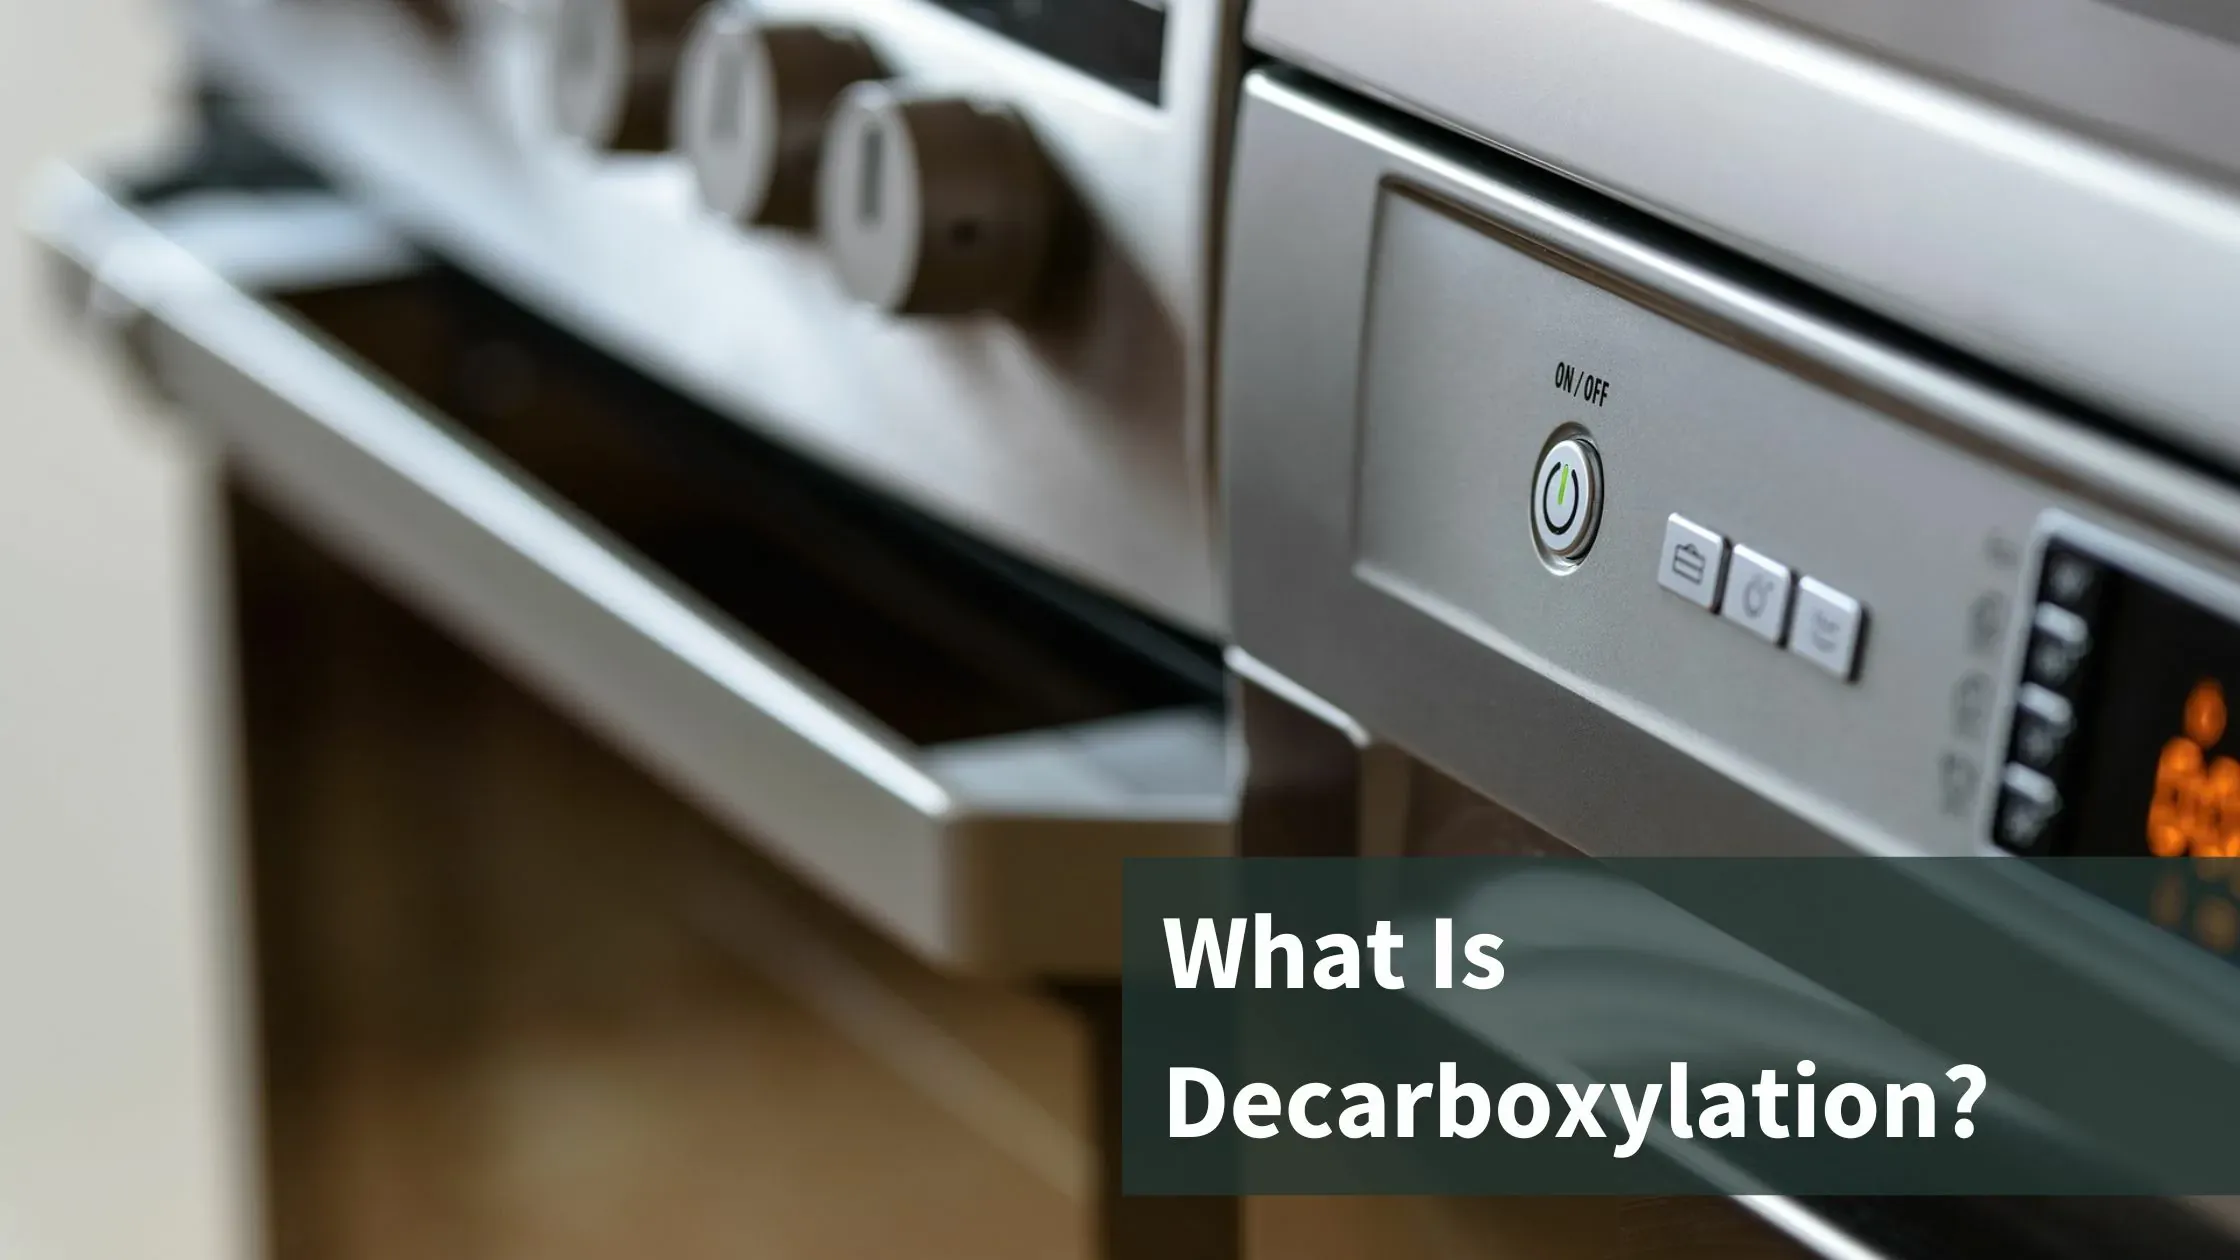 Close up of a modern kitchen with the text "What is decarboxylation?"